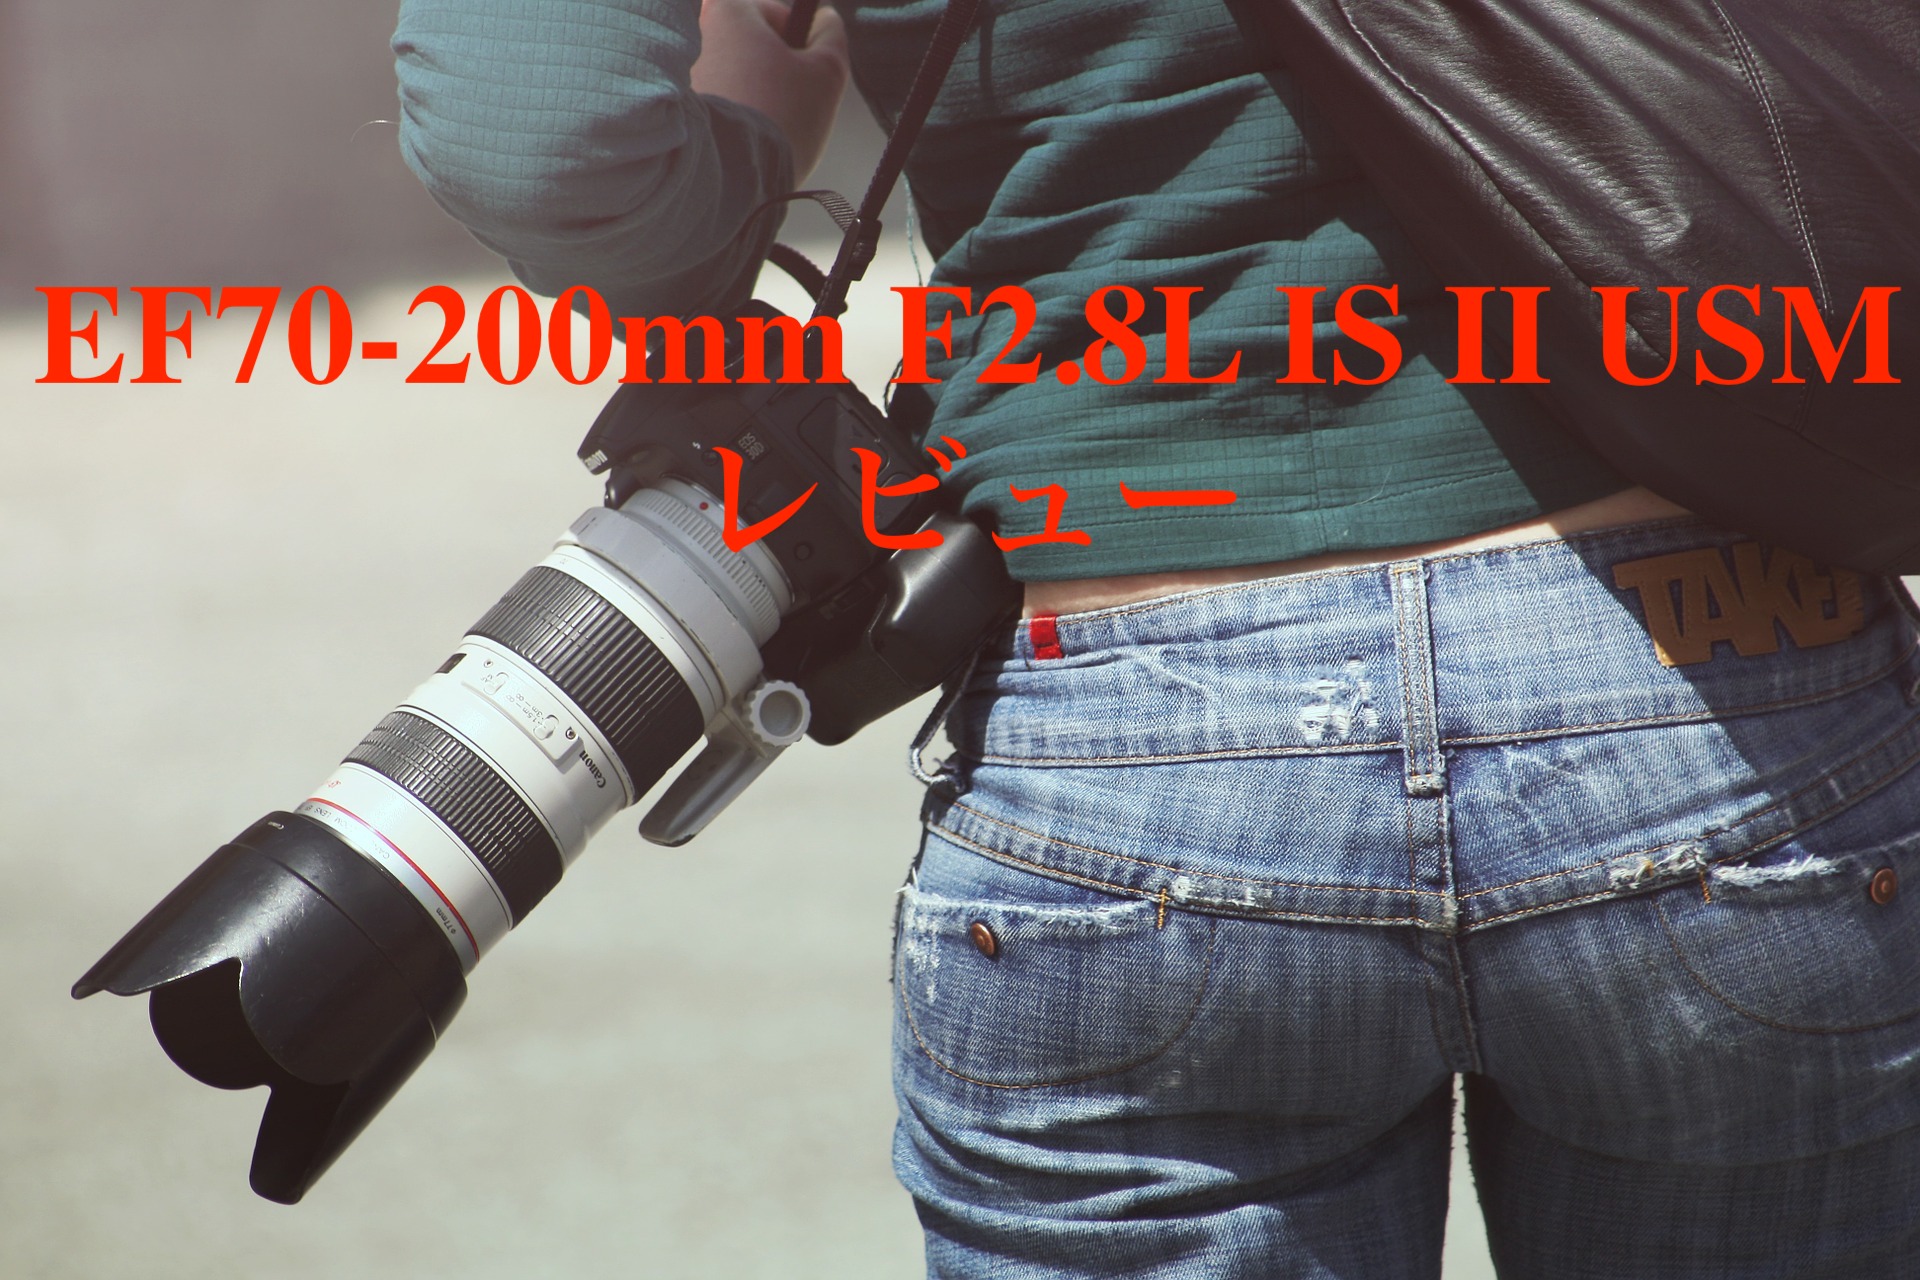 Canon EF70-200mm f2.8L IS II USM